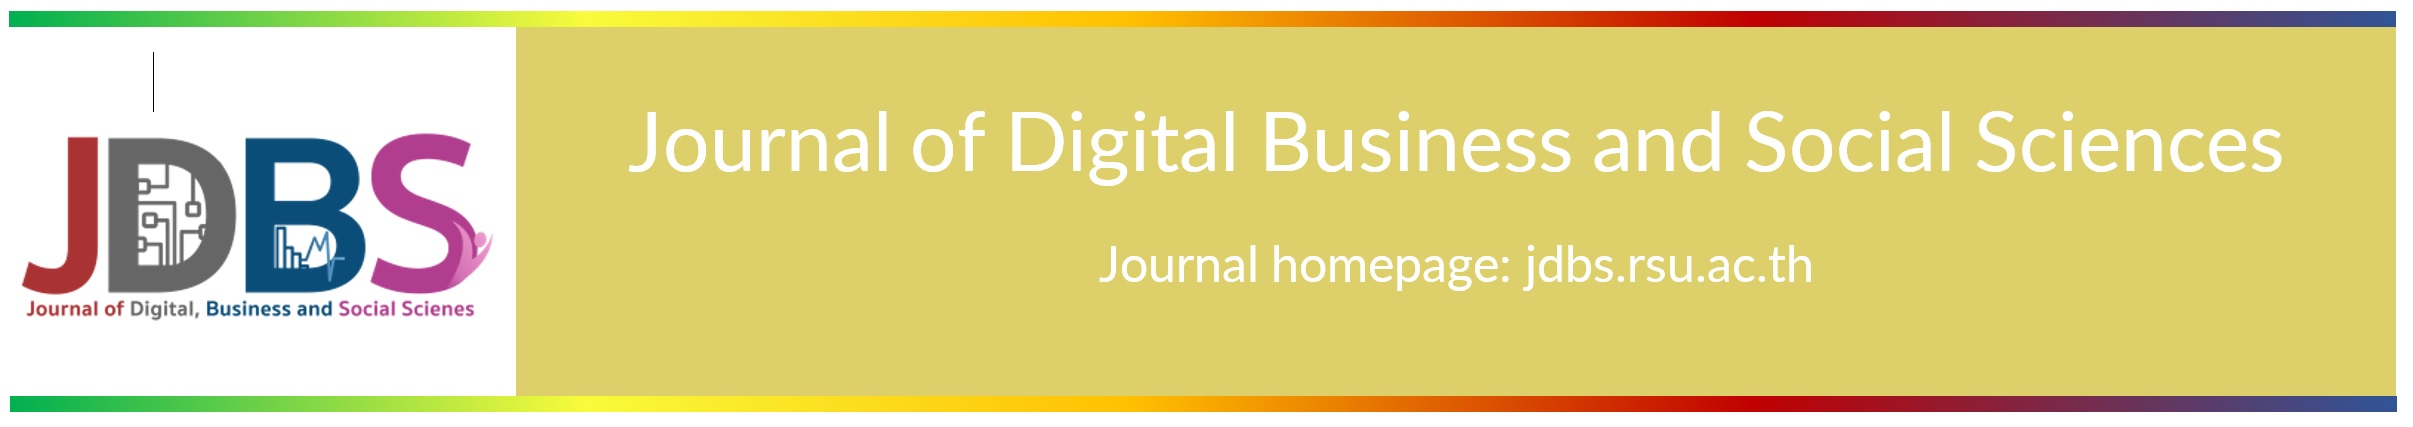 Journal of Digital Business and Social Sciences